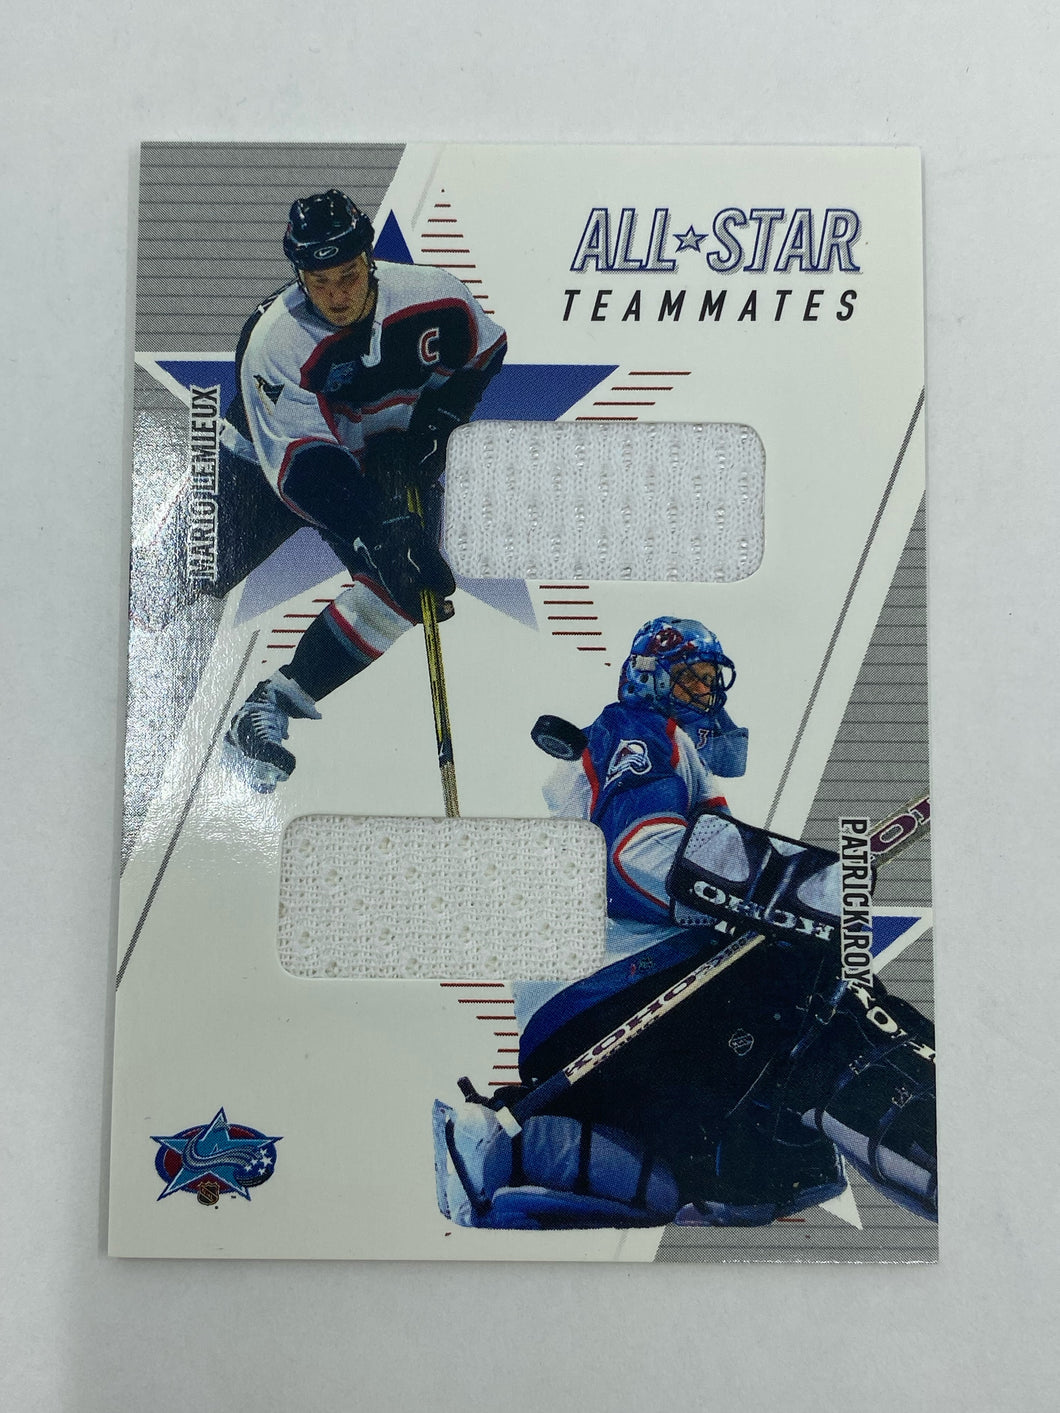 2002-03 In the Game All Star Teammates #AST-22 Lemieux/Roy Jersey